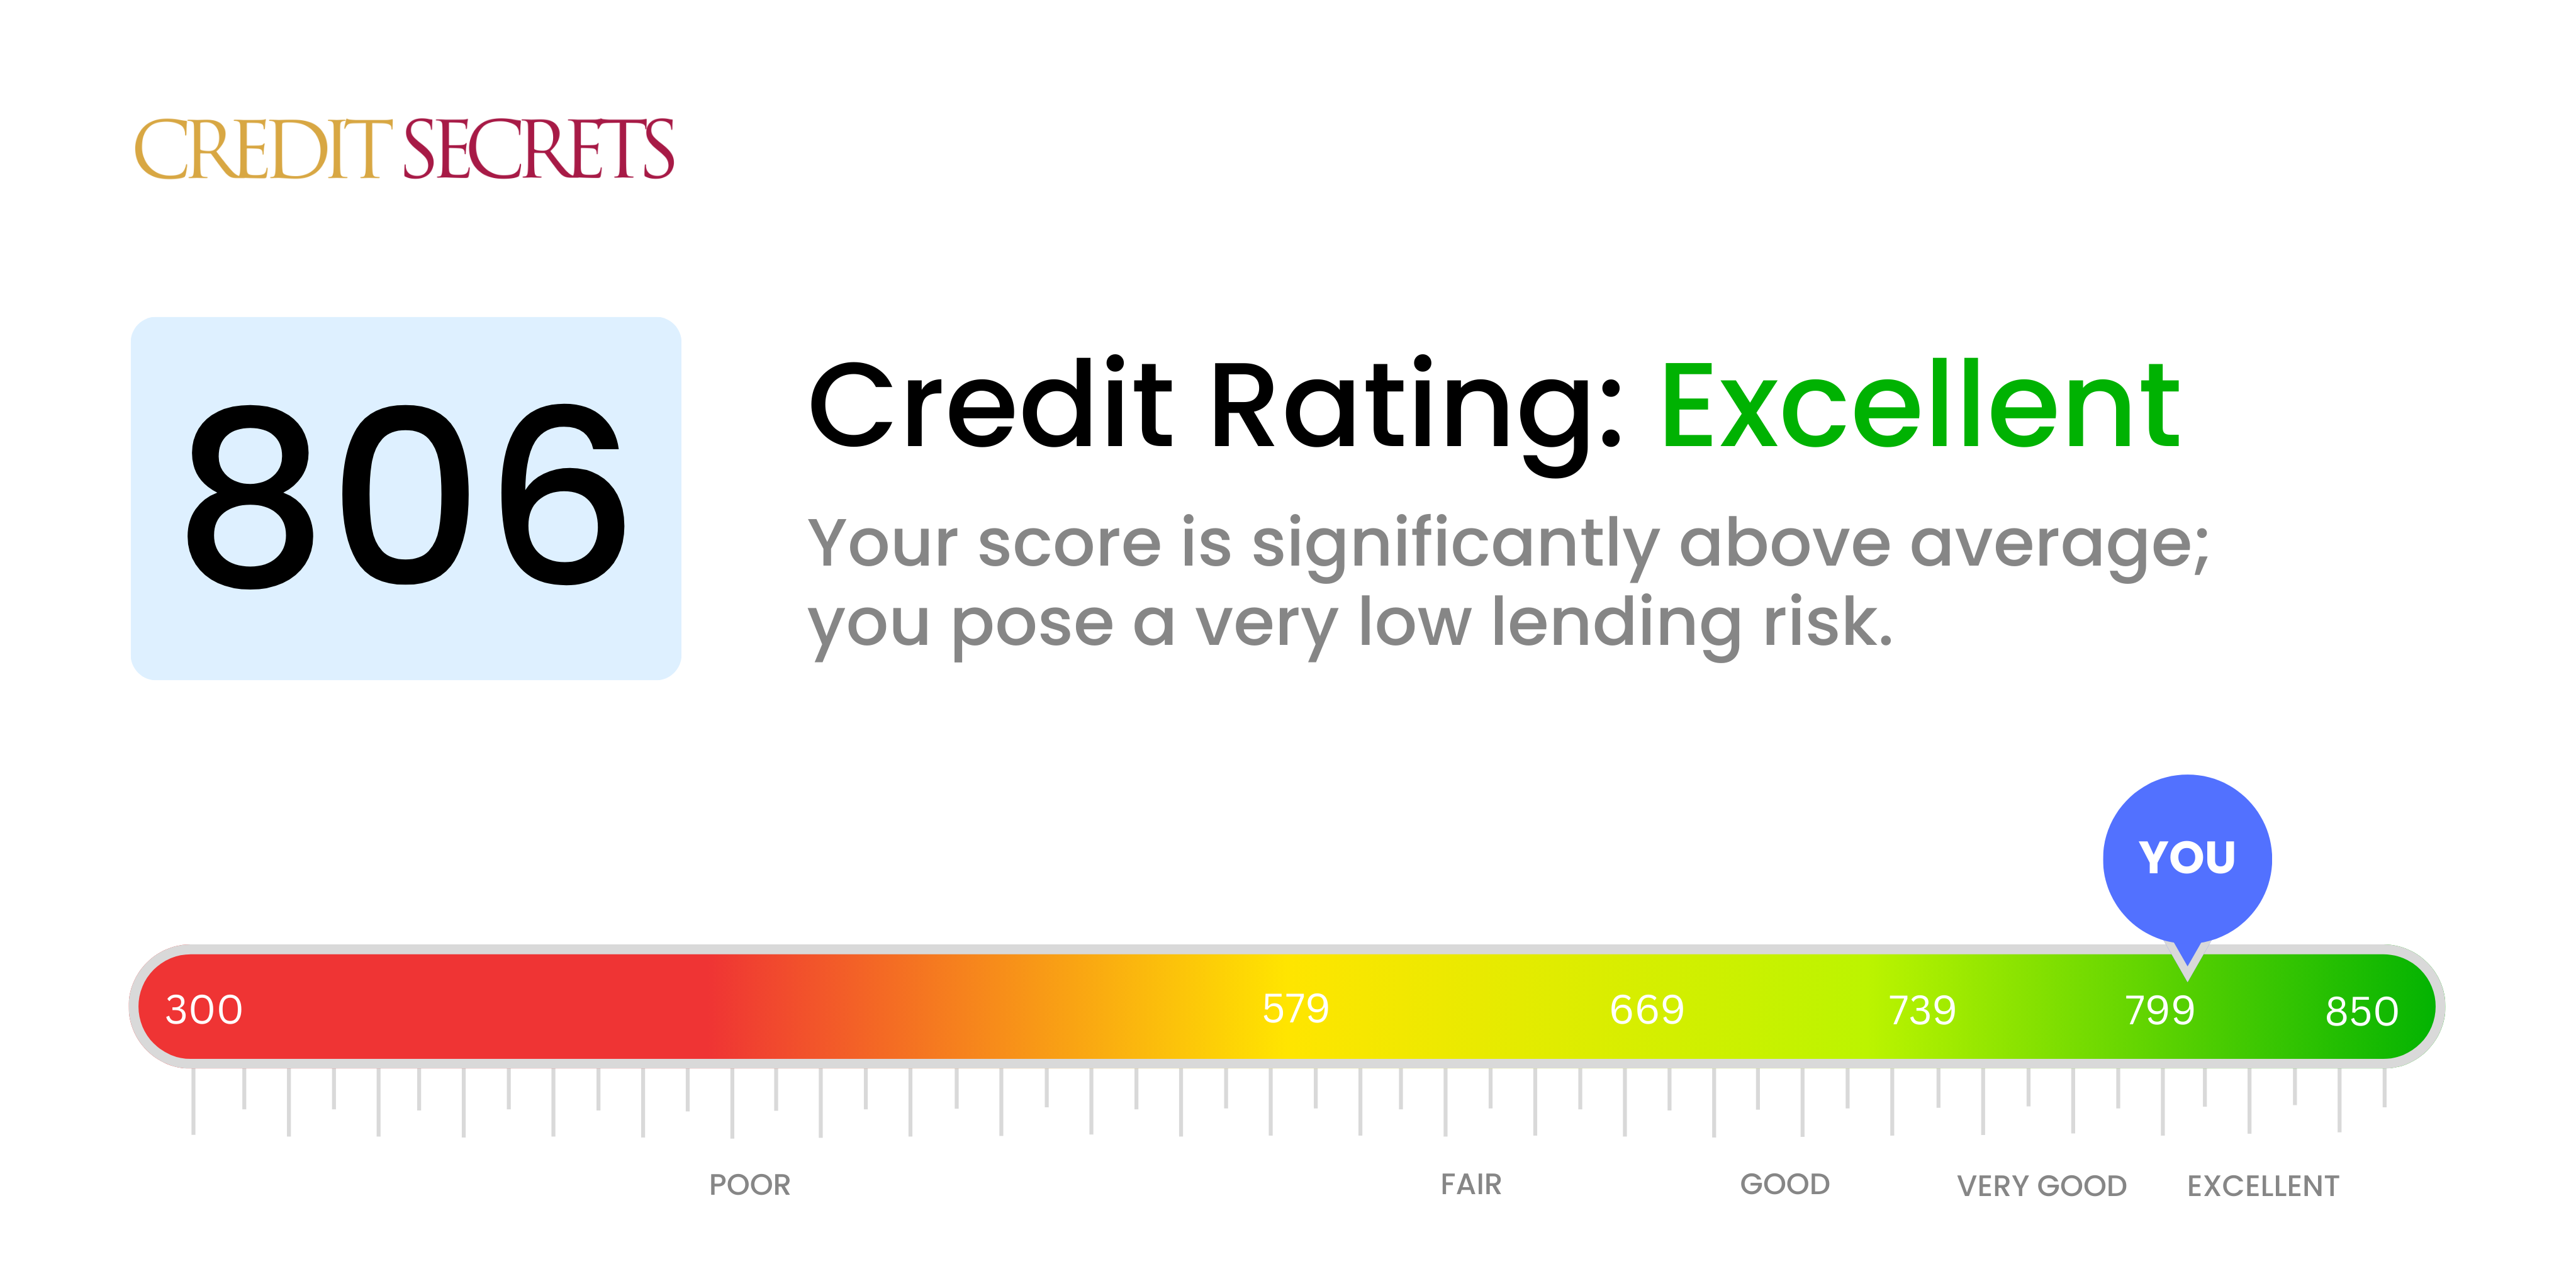 Is 806 a good credit score?